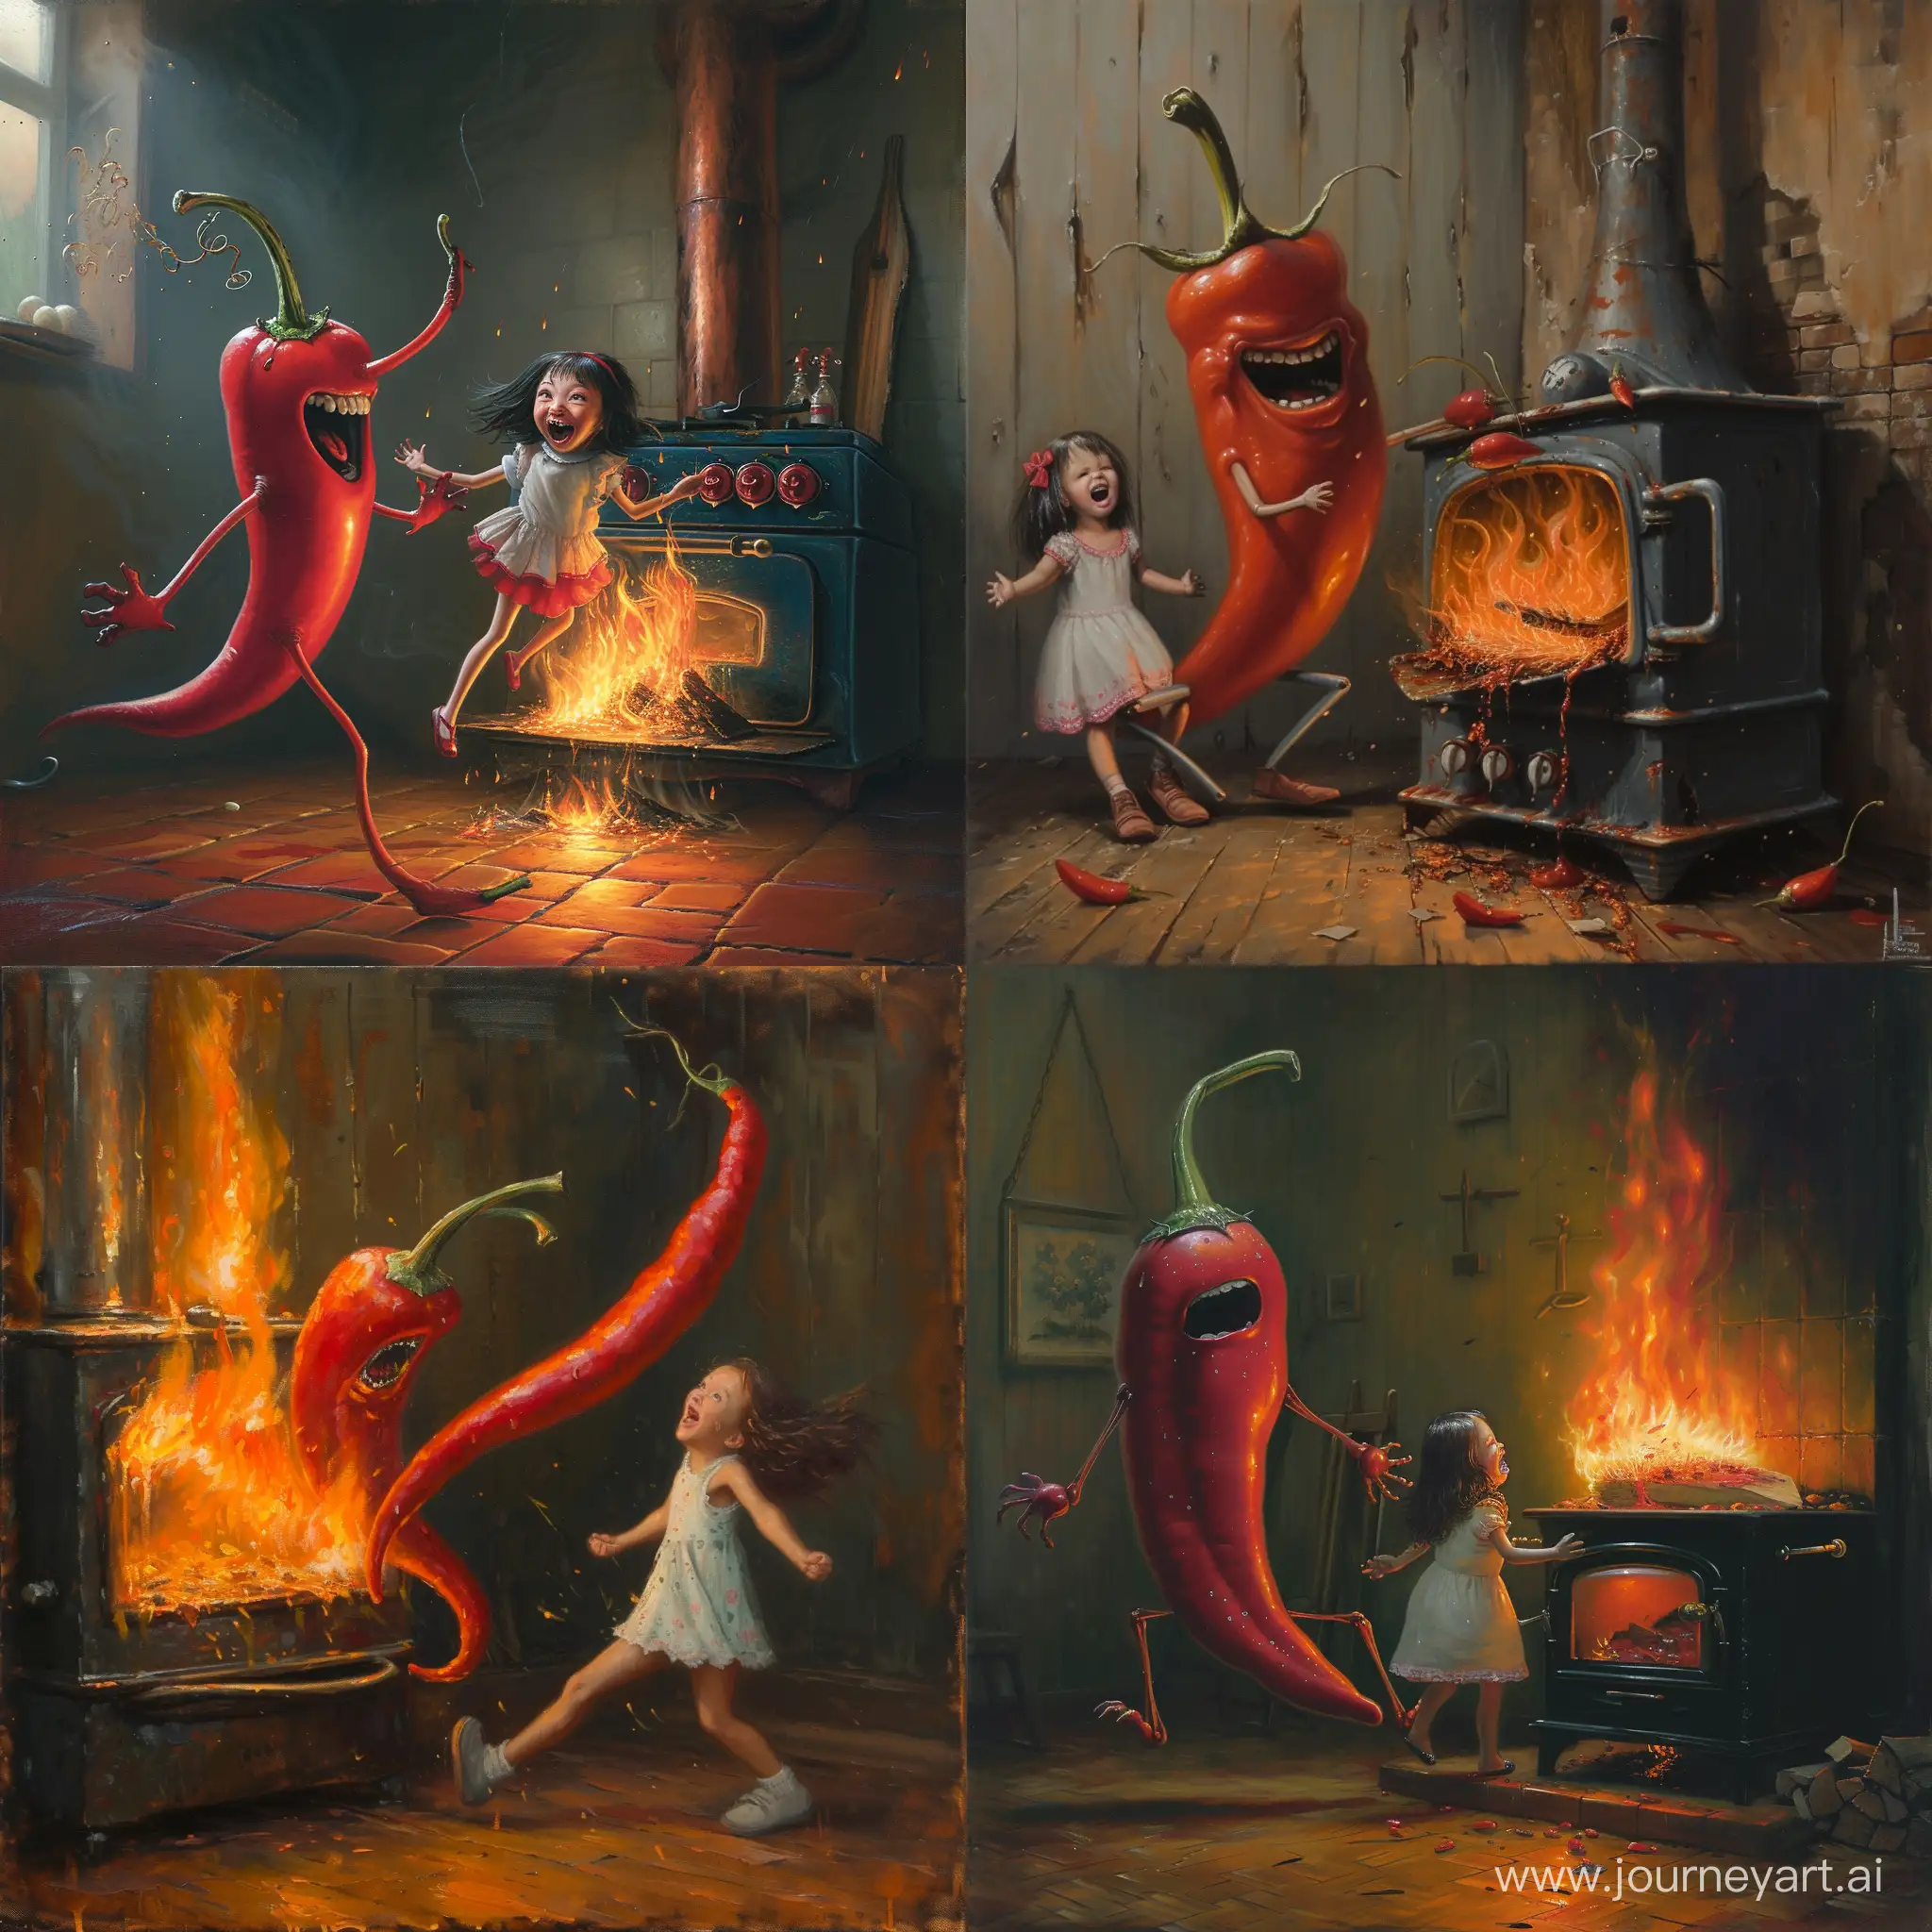 Mischievous-Chili-Pepper-Drags-Little-Girl-into-Stove-with-Fiery-Laughter